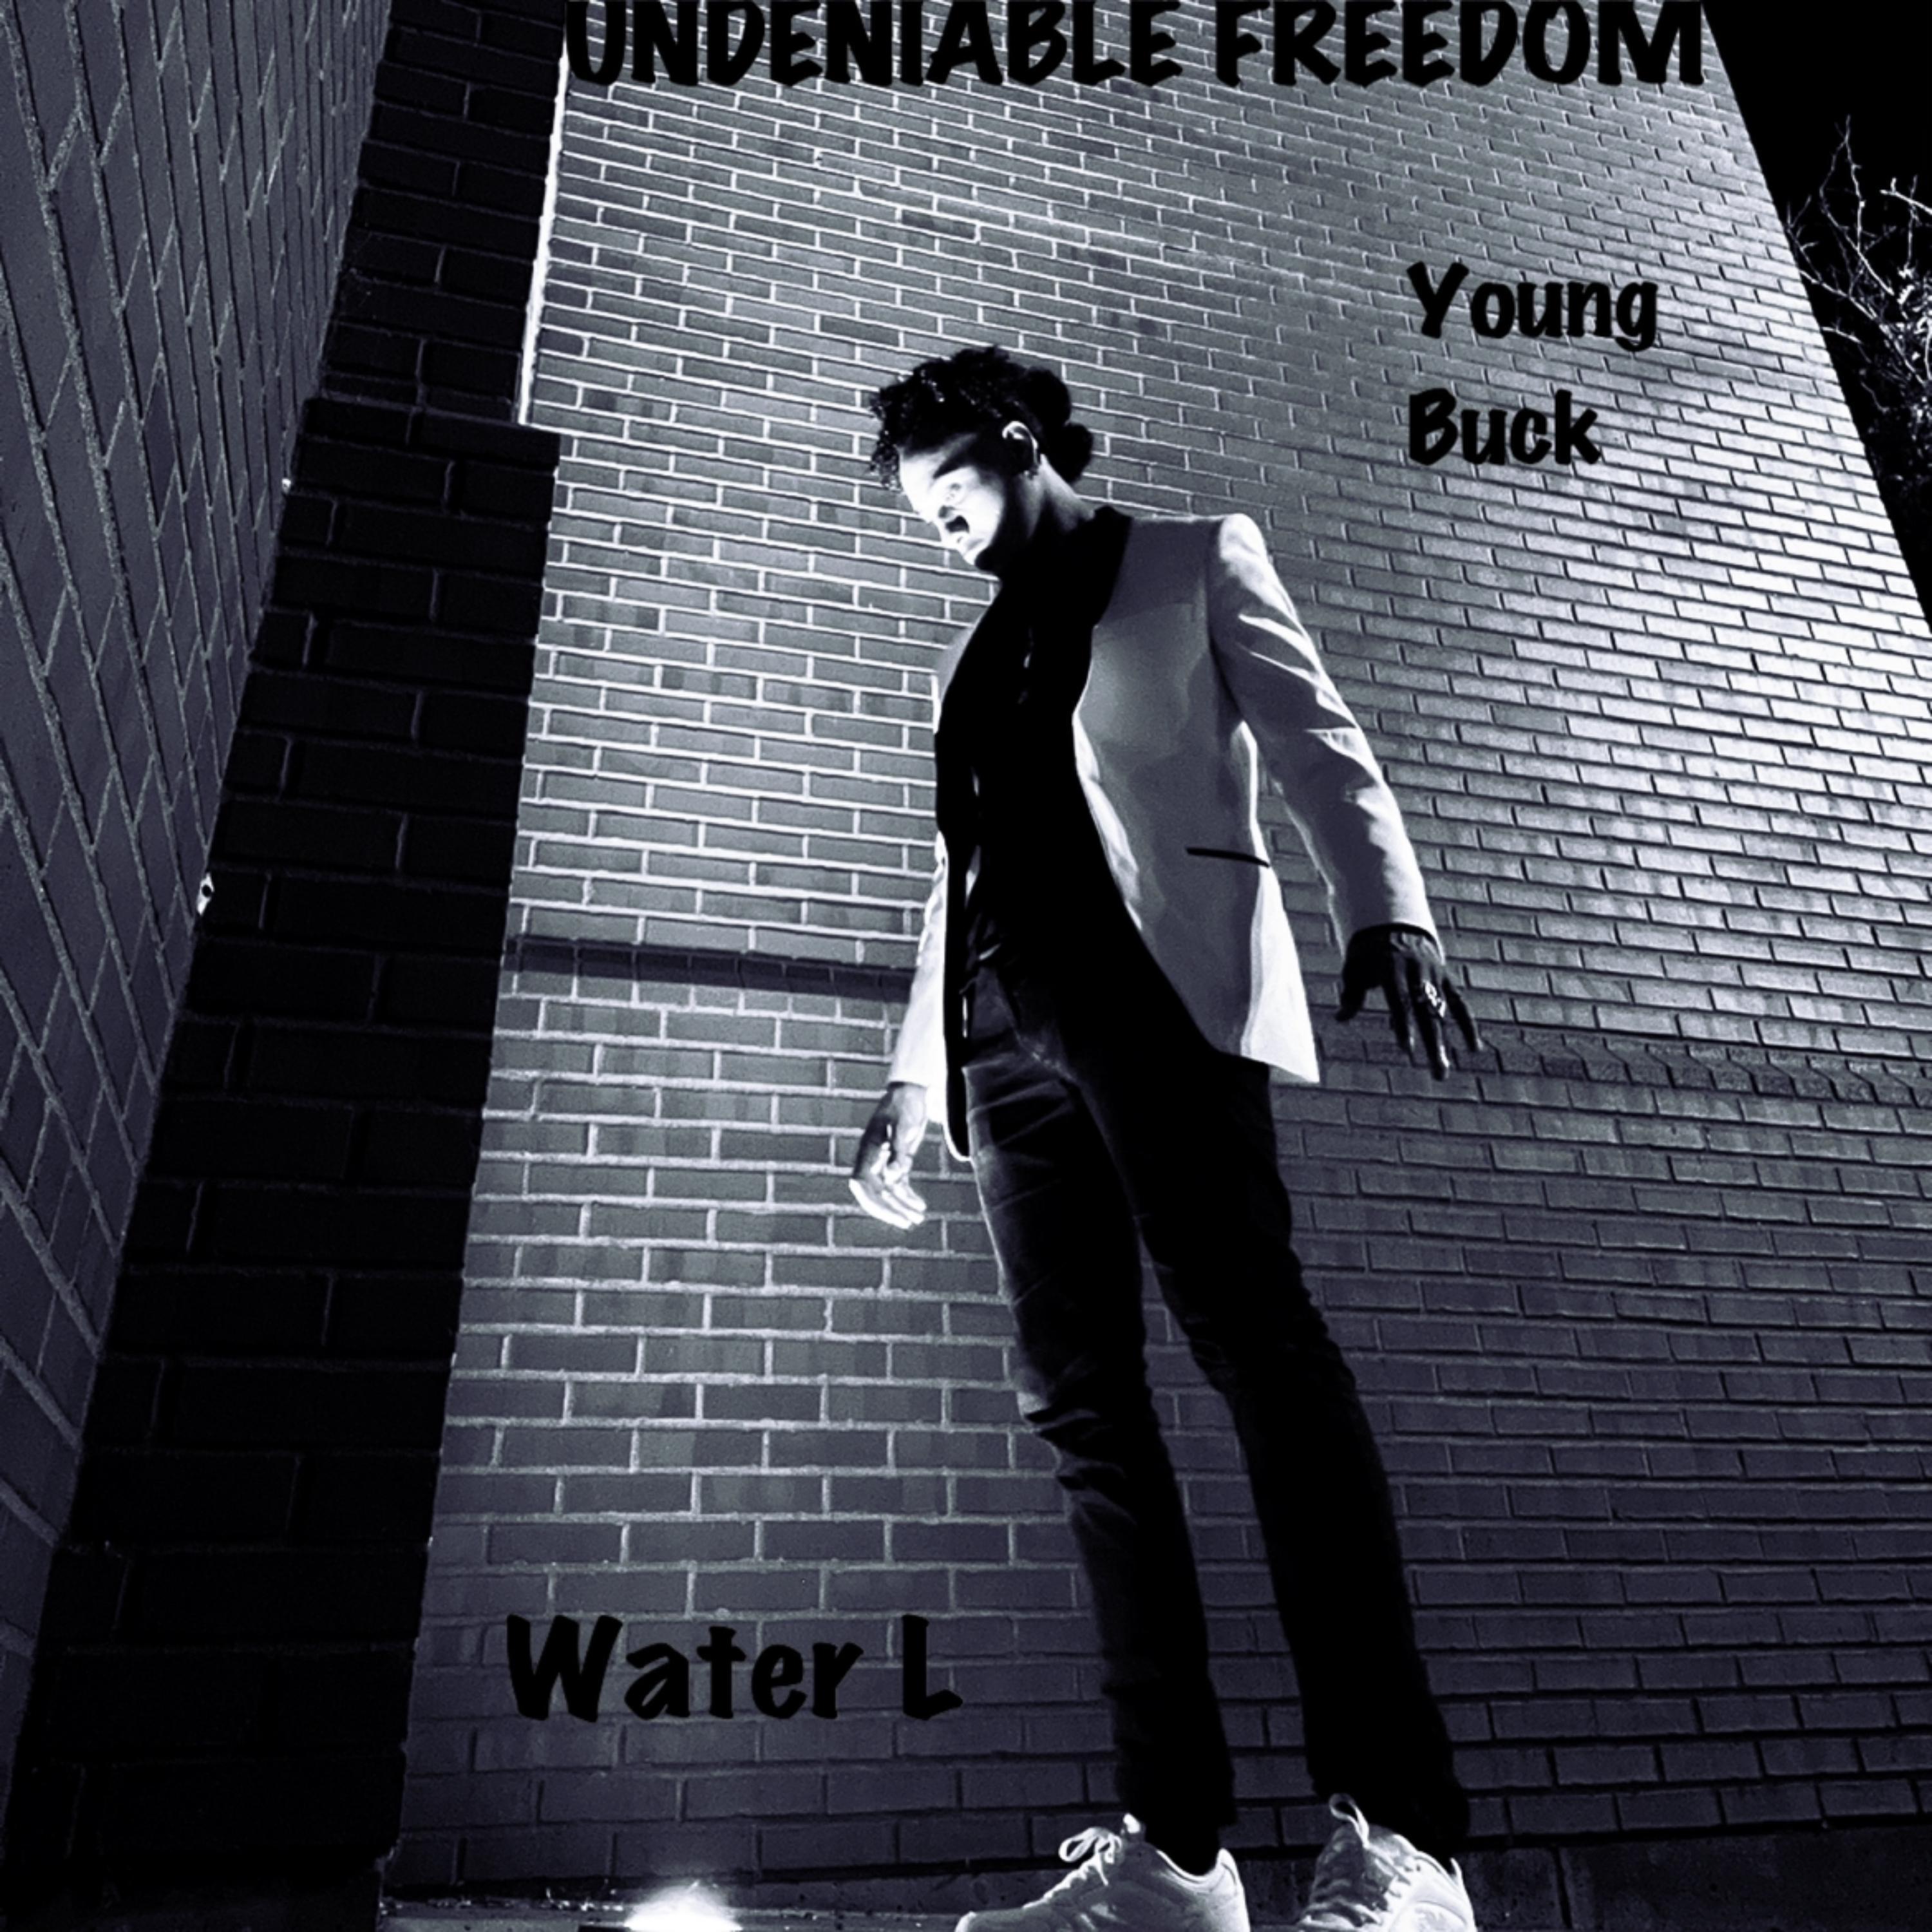 Water L - UNDENIABLE FREEDOM